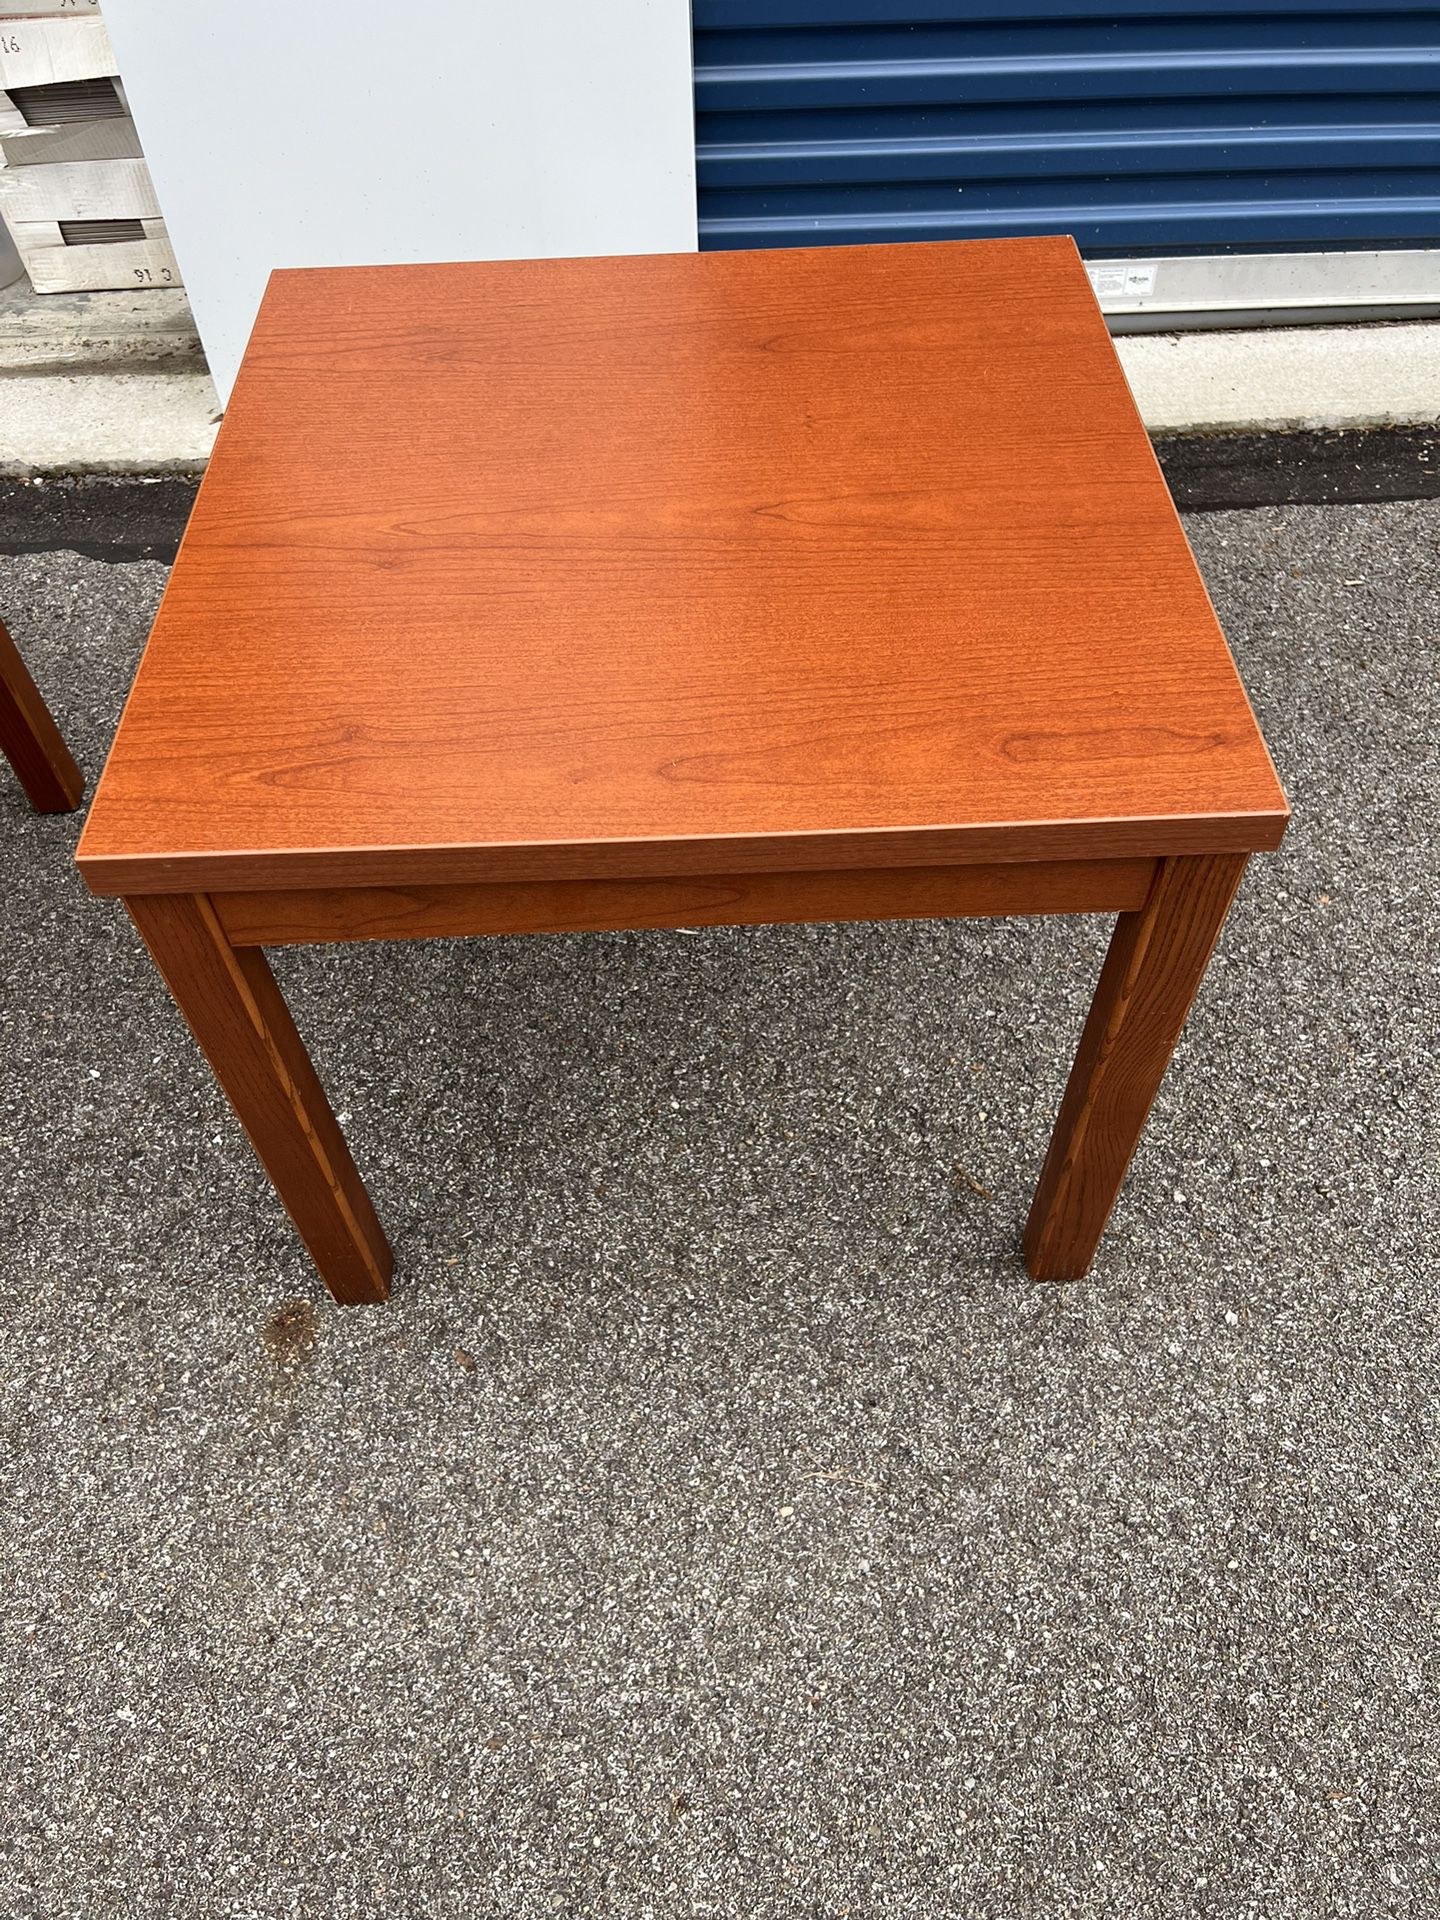 Square Wooden Side Table  23 3/4” wide  23 3/4” long  20 1/2” tall 